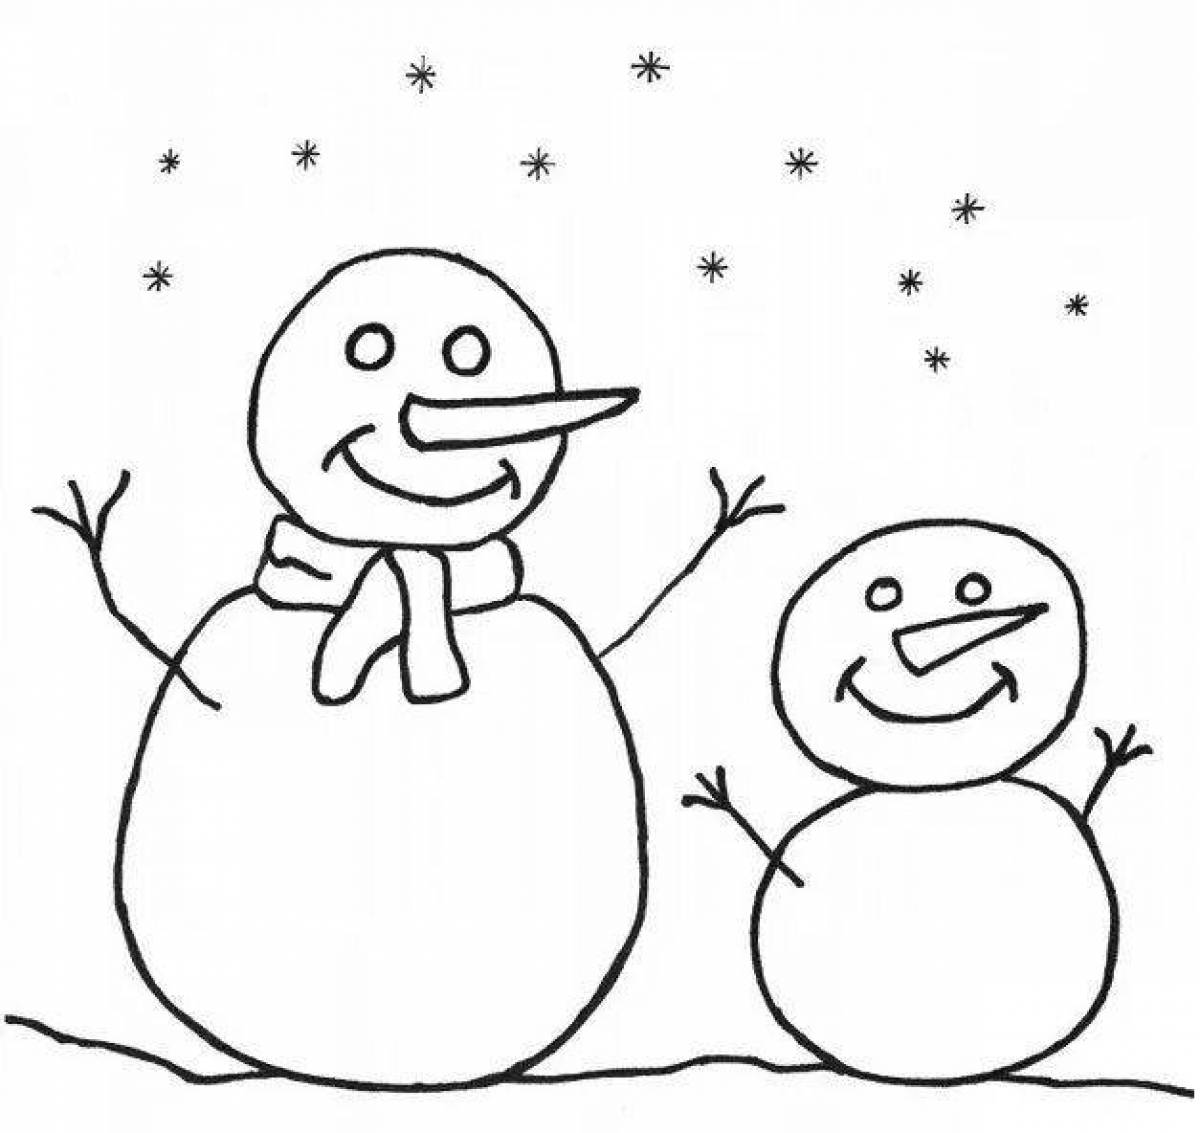 Color-explosion snowman coloring book for kids 2-3 years old